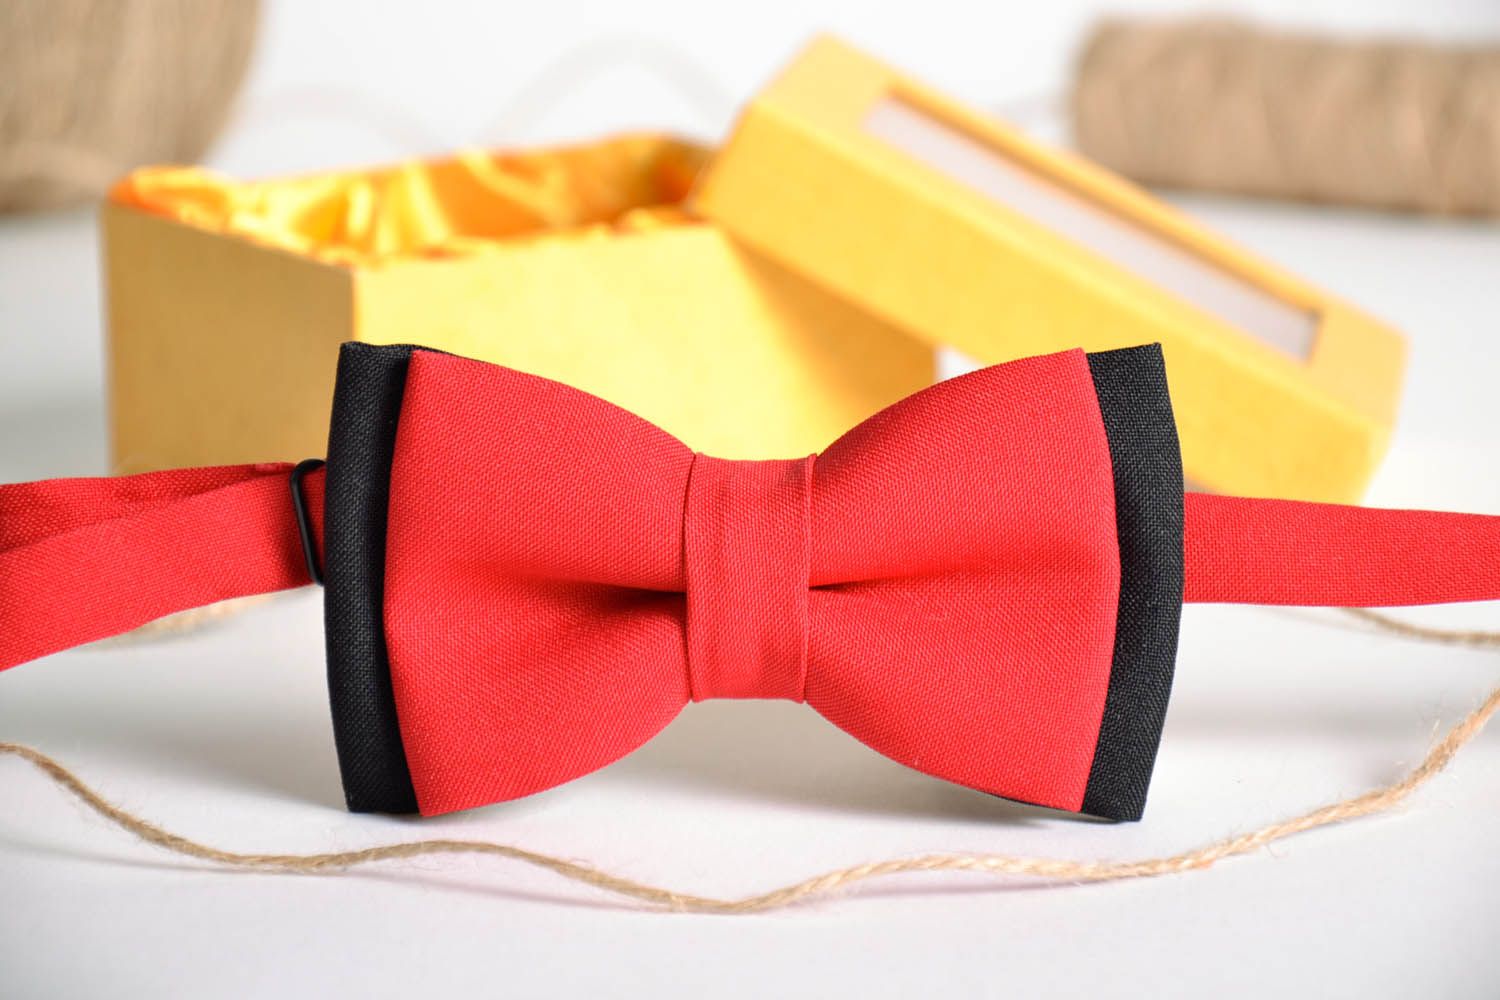 Black and red bow tie photo 1